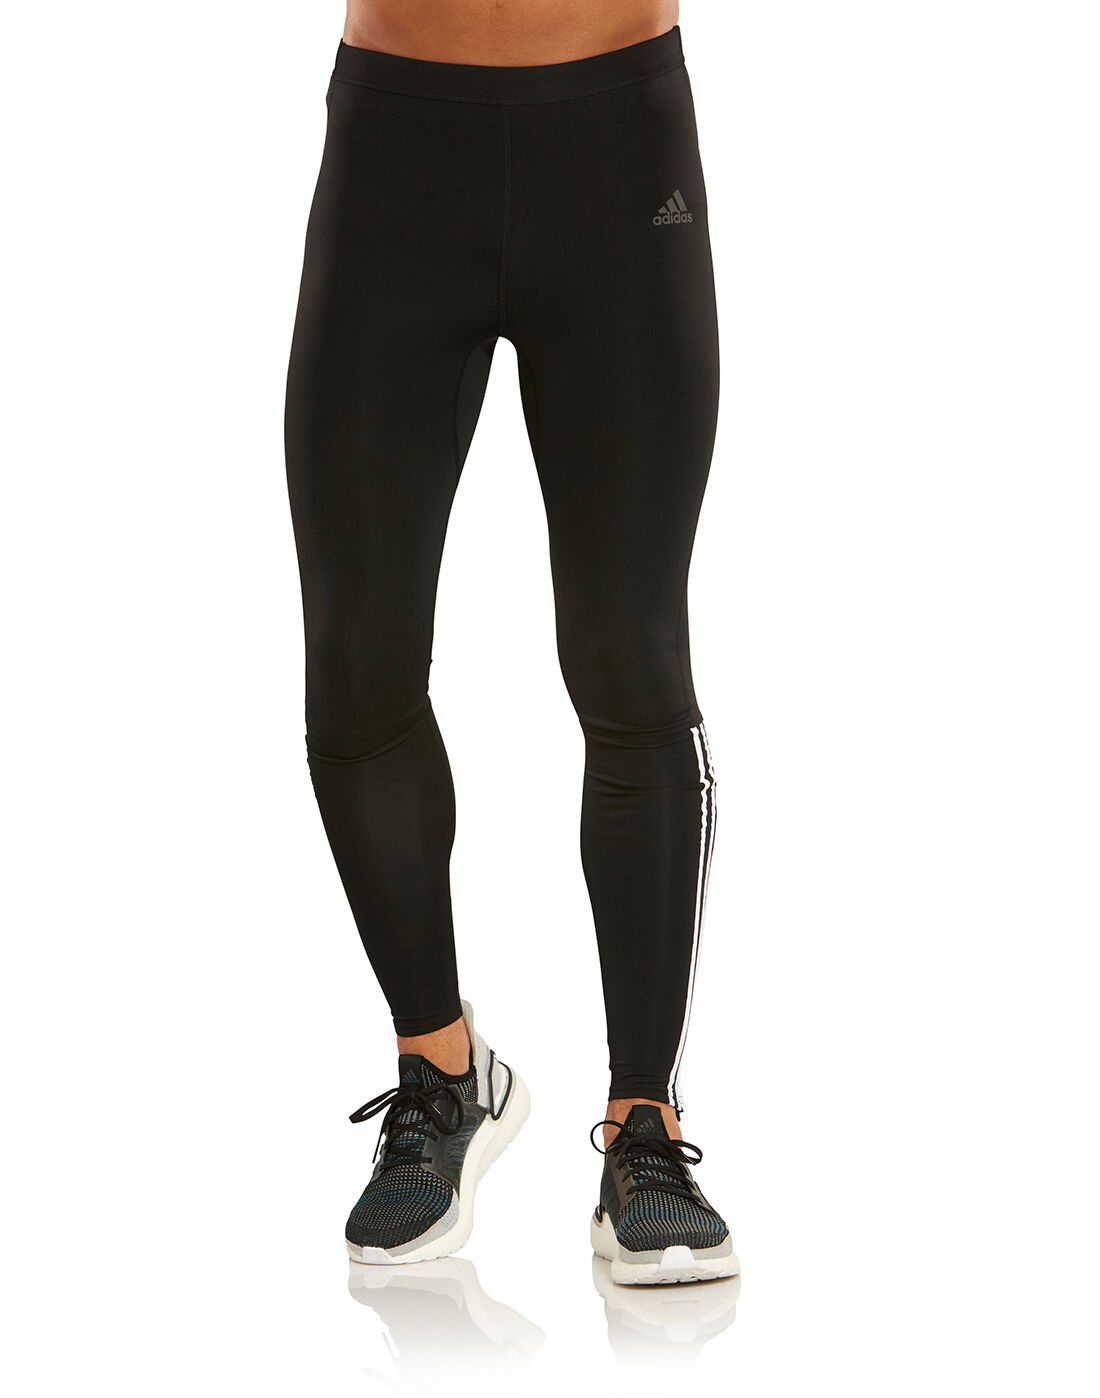 Adidas Running Bottoms Top Sellers, SAVE -